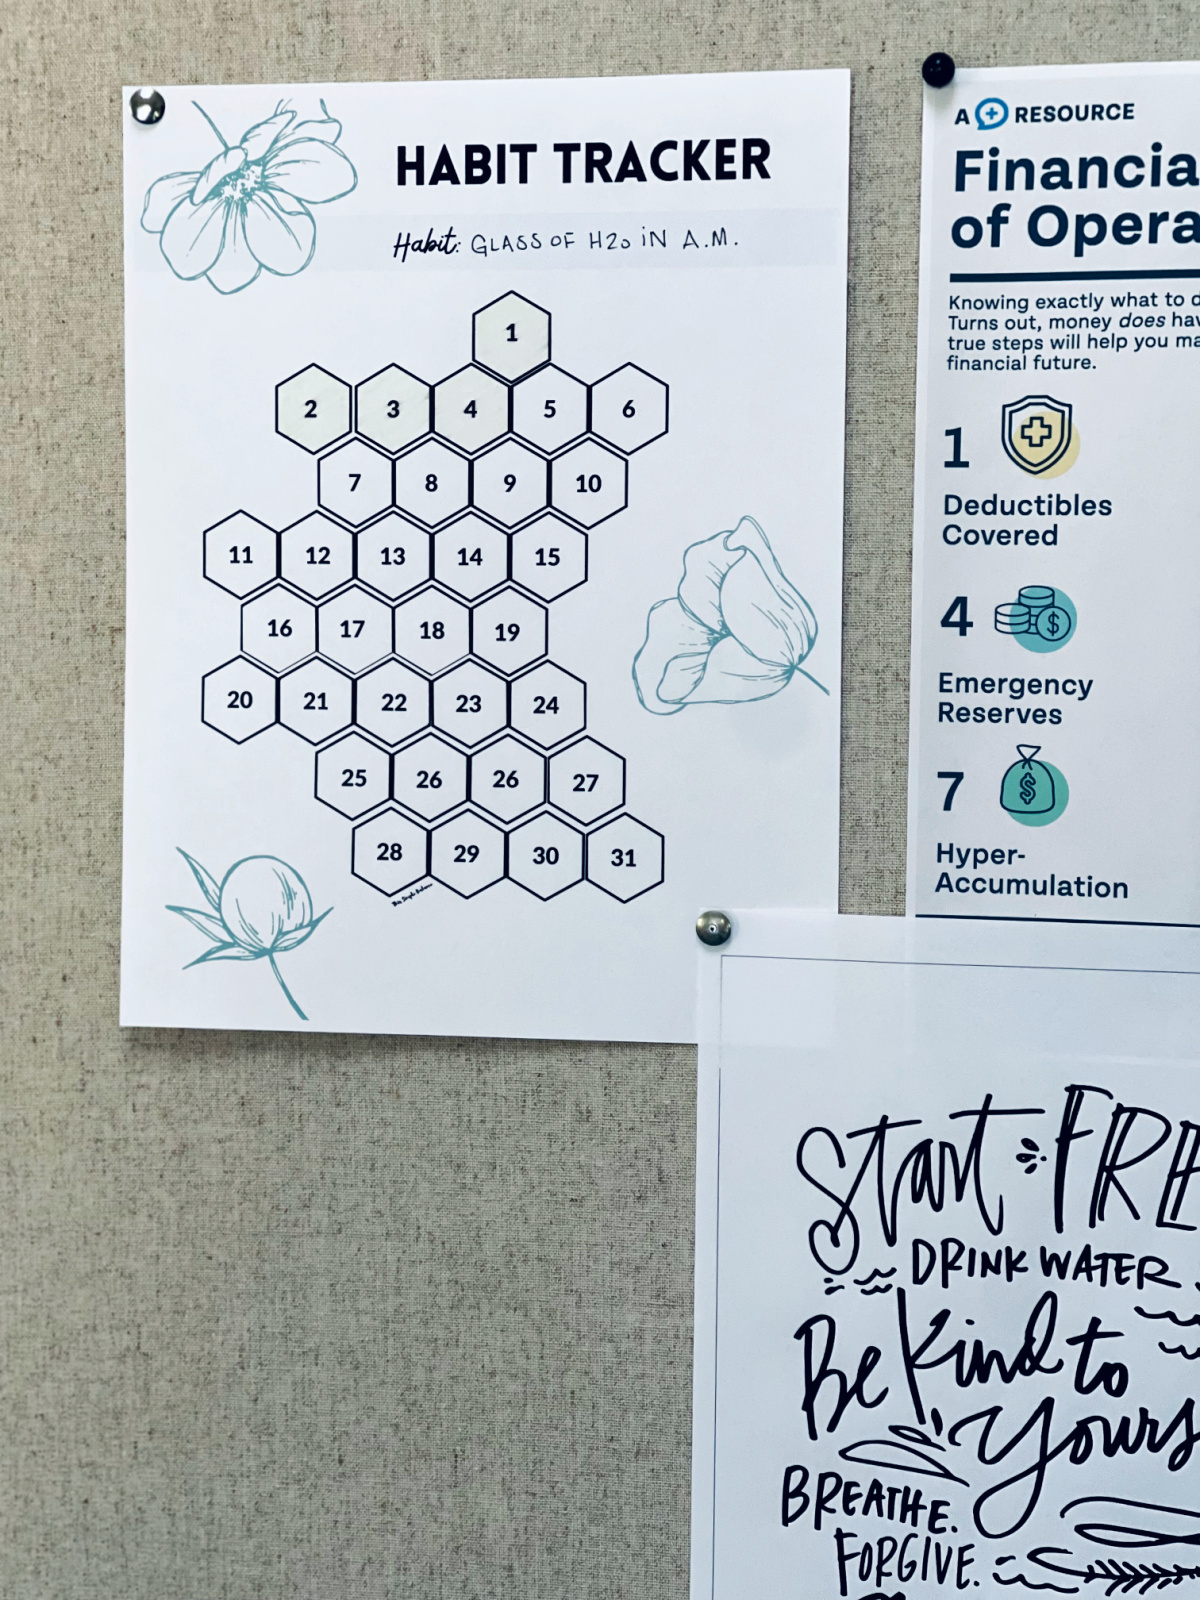 habit tracker on bulletin board with spaces shaded to indicate progress.